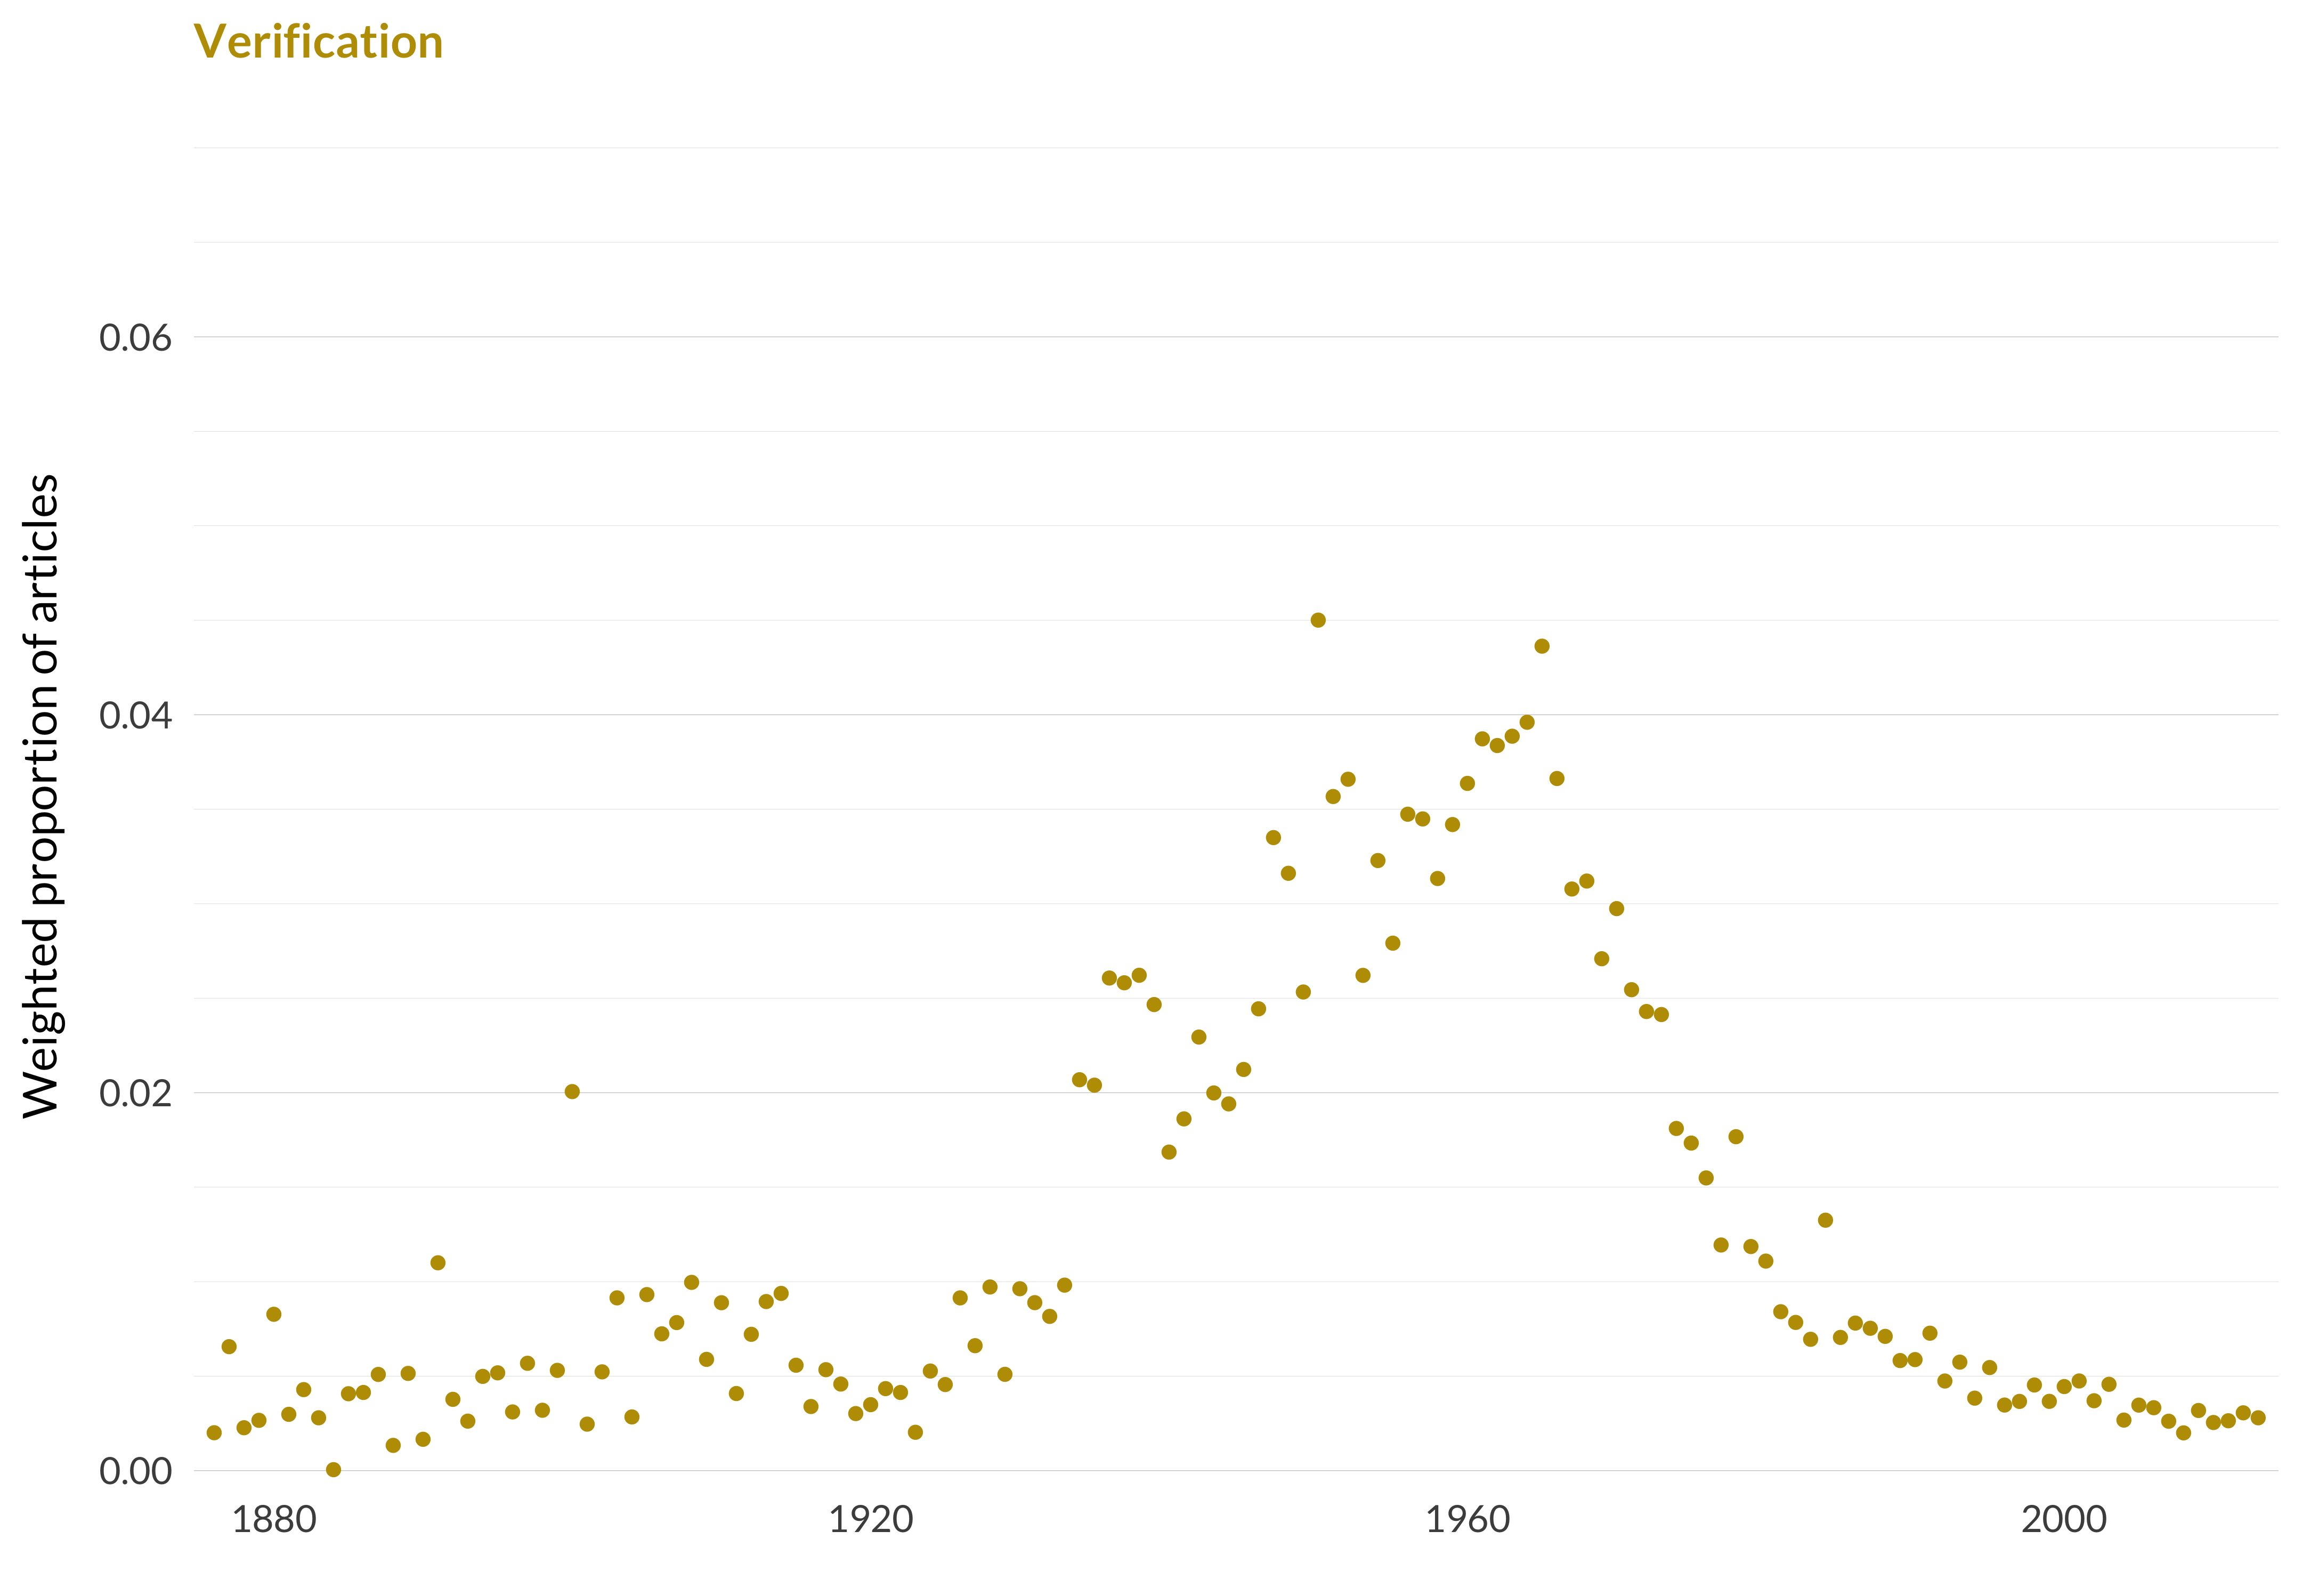 A scatterplot showing which proportion of articles each year are in the verificationtopic. The x-axis shows the year, the y-axis measures the proportion of articles each year in this topic. There is one dot per year. The highest value is in 1950 when 4.5% of articles were in this topic. The lowest value is in 1884 when 0.0% of articles were in this topic. The full table that provides the data for this graph is available in Table A.15 in Appendix A.